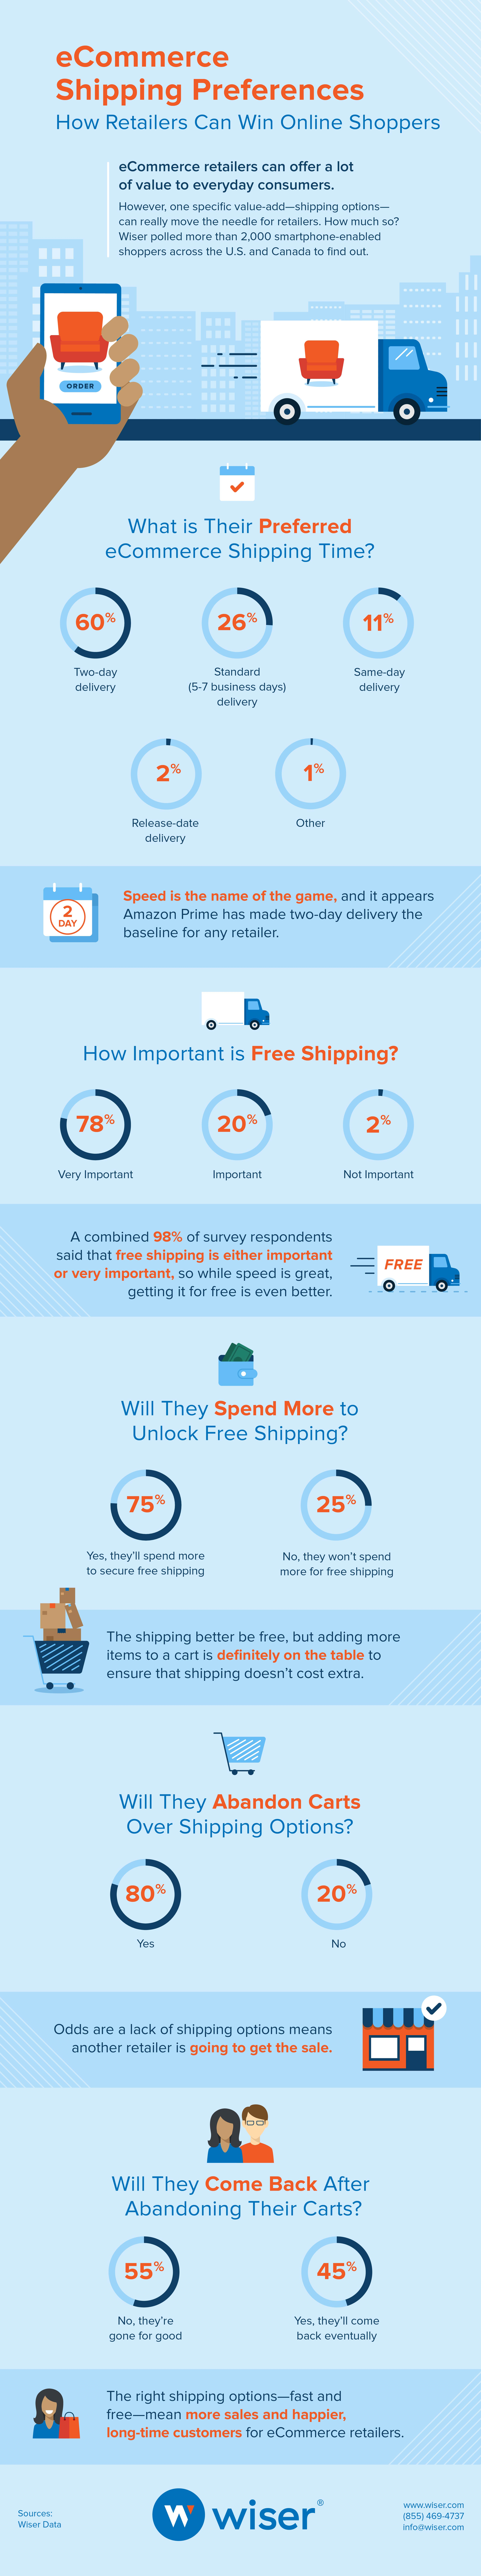 eCommerce Shipping Preferences: How Retailers Can Win Other Shoppers